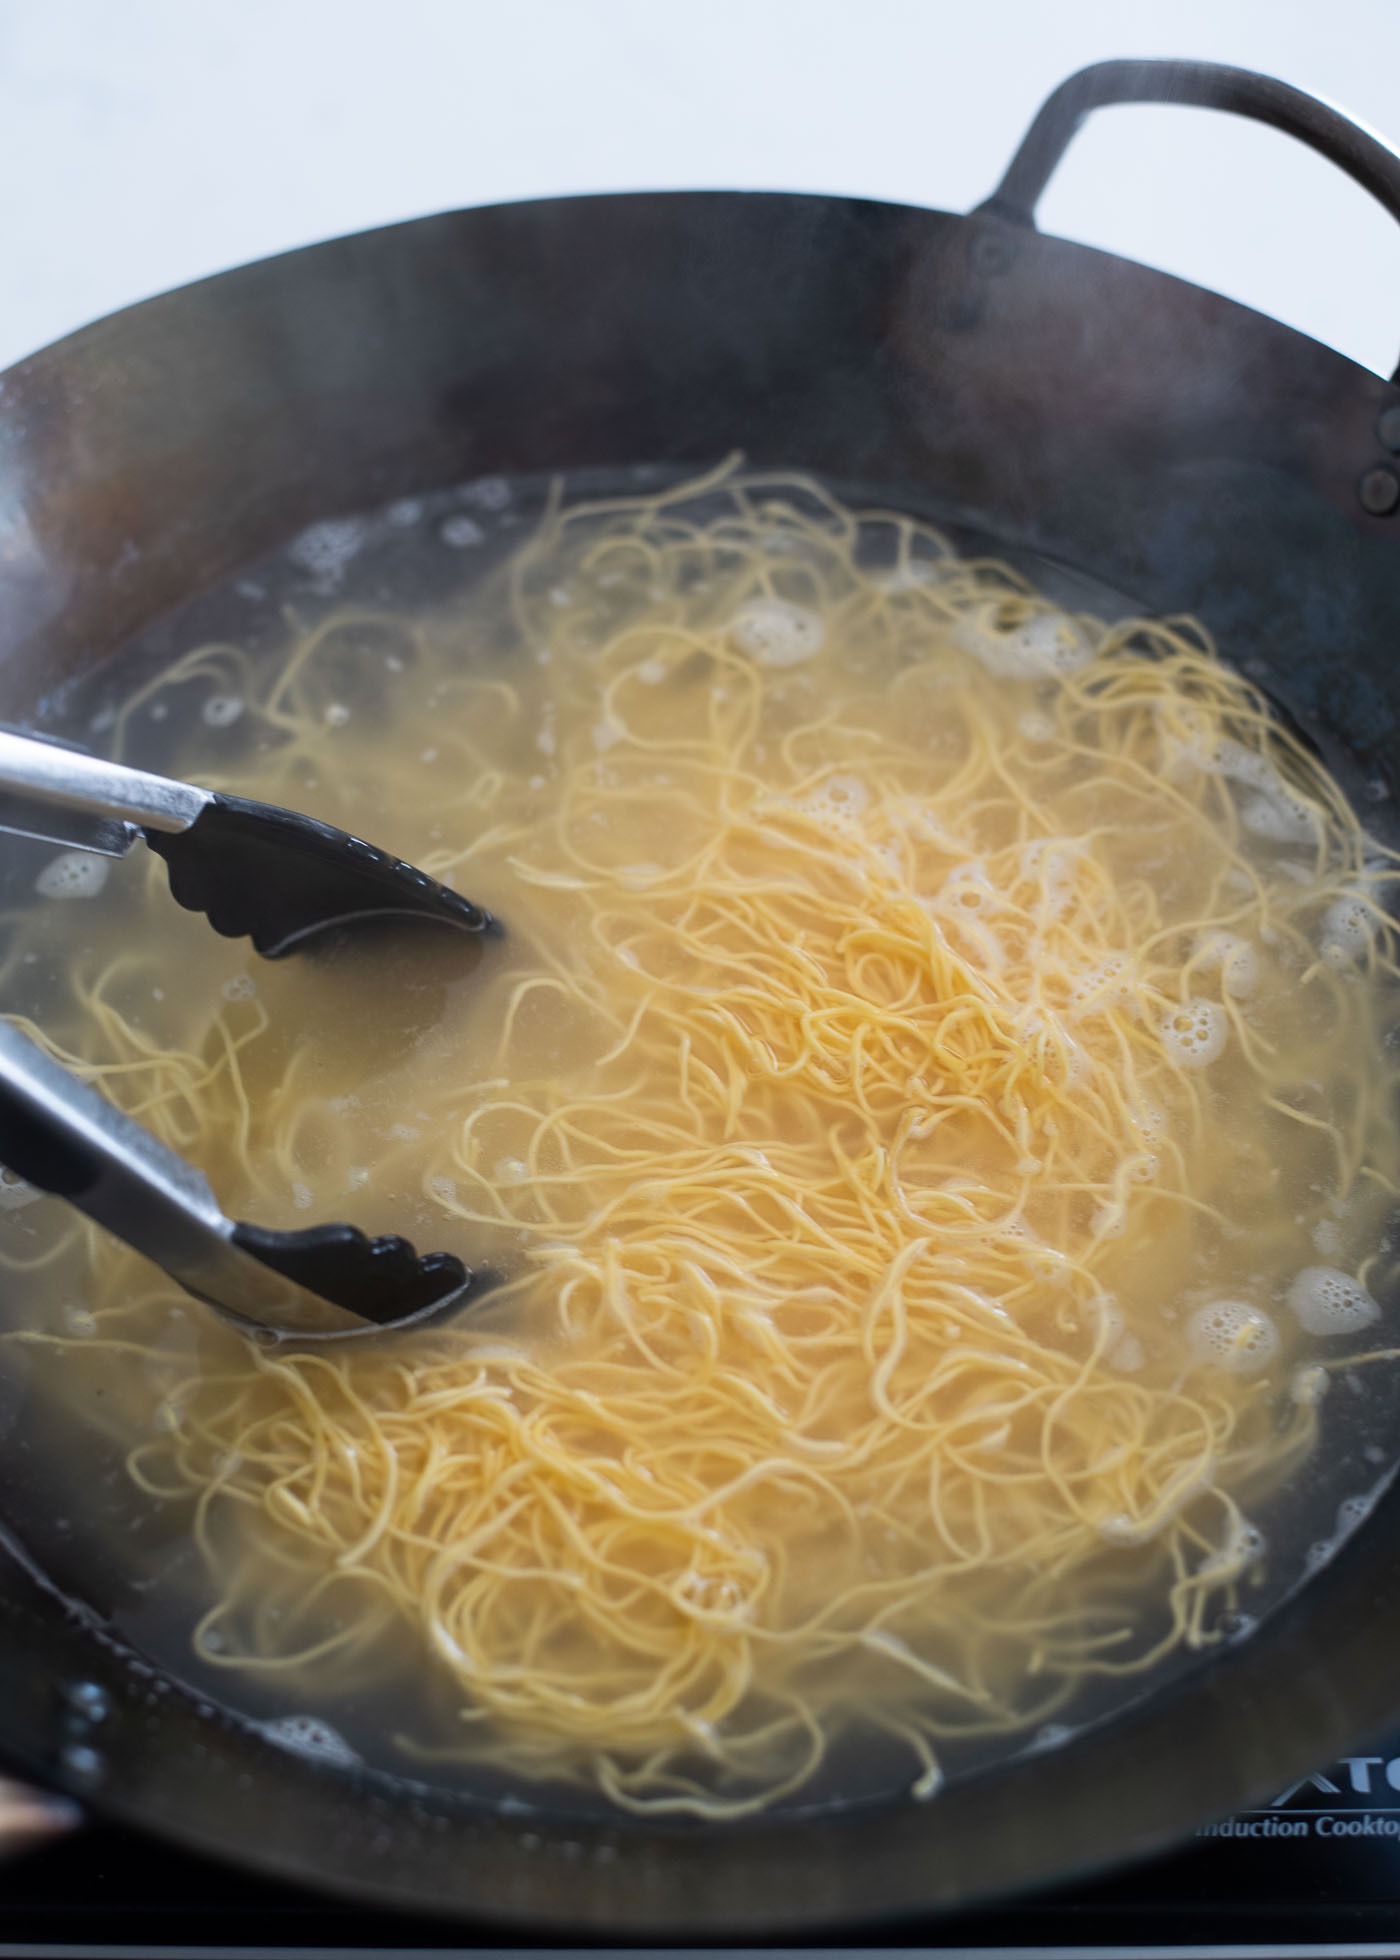 Egg noodles are being cooked in boiling water in a wok.